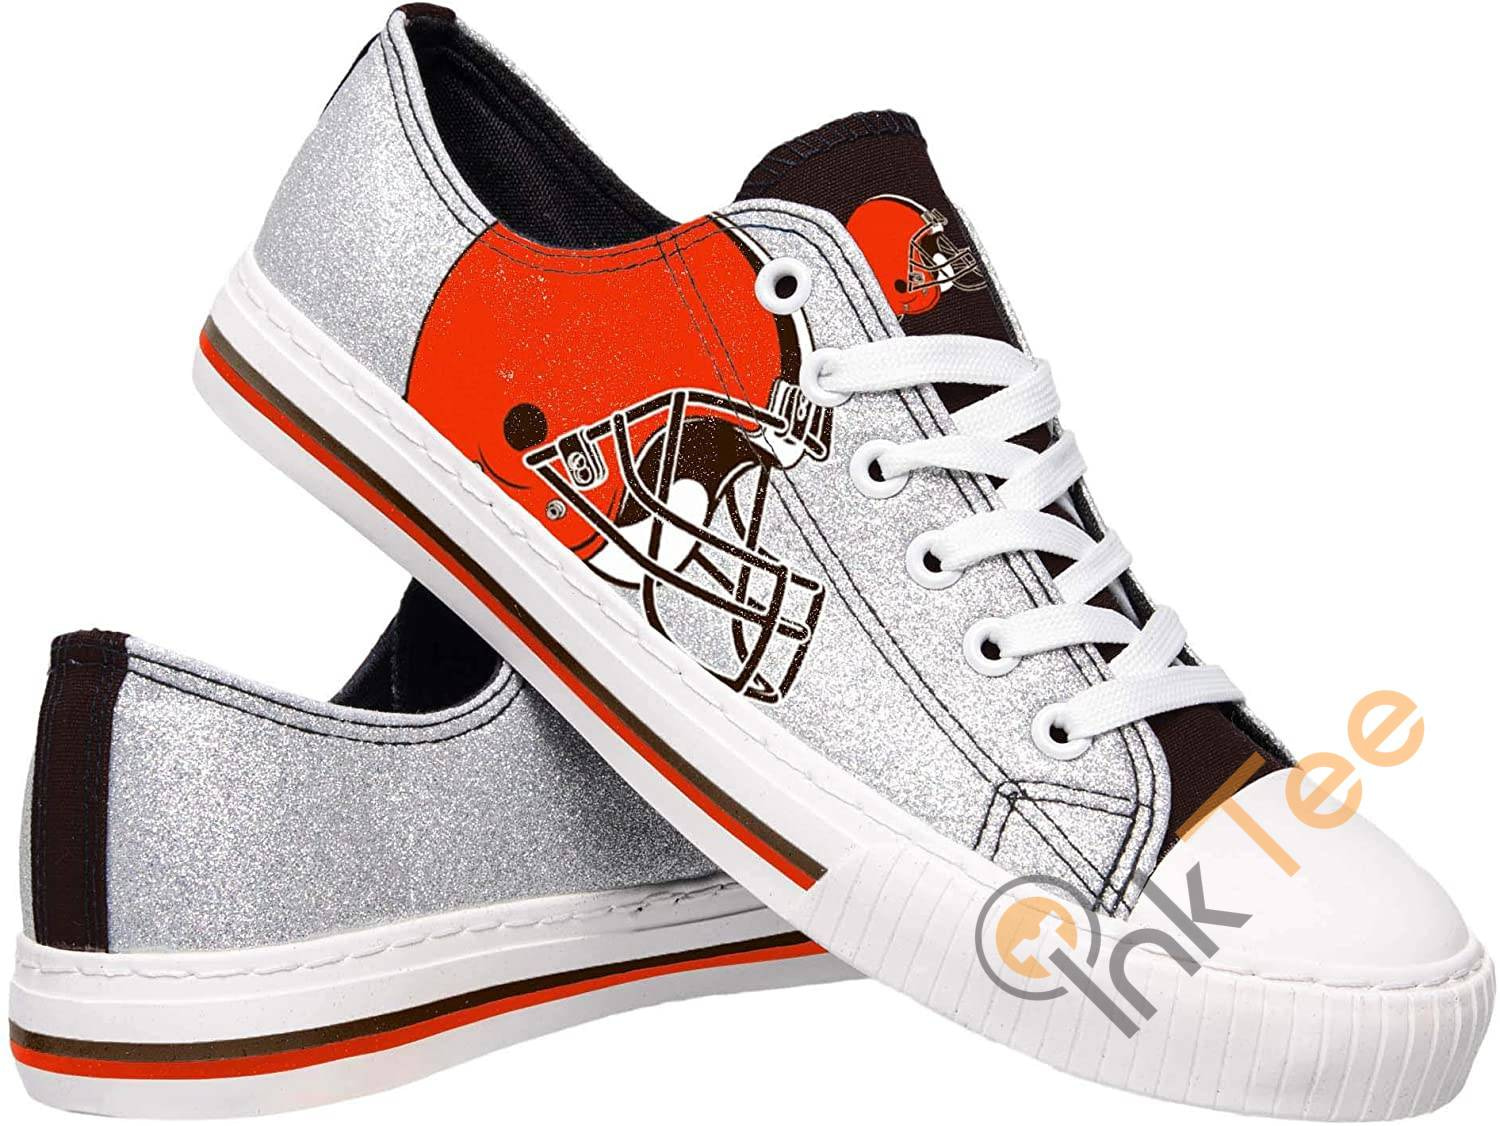 Nfl Cleveland Browns Team Low Top Sneakers